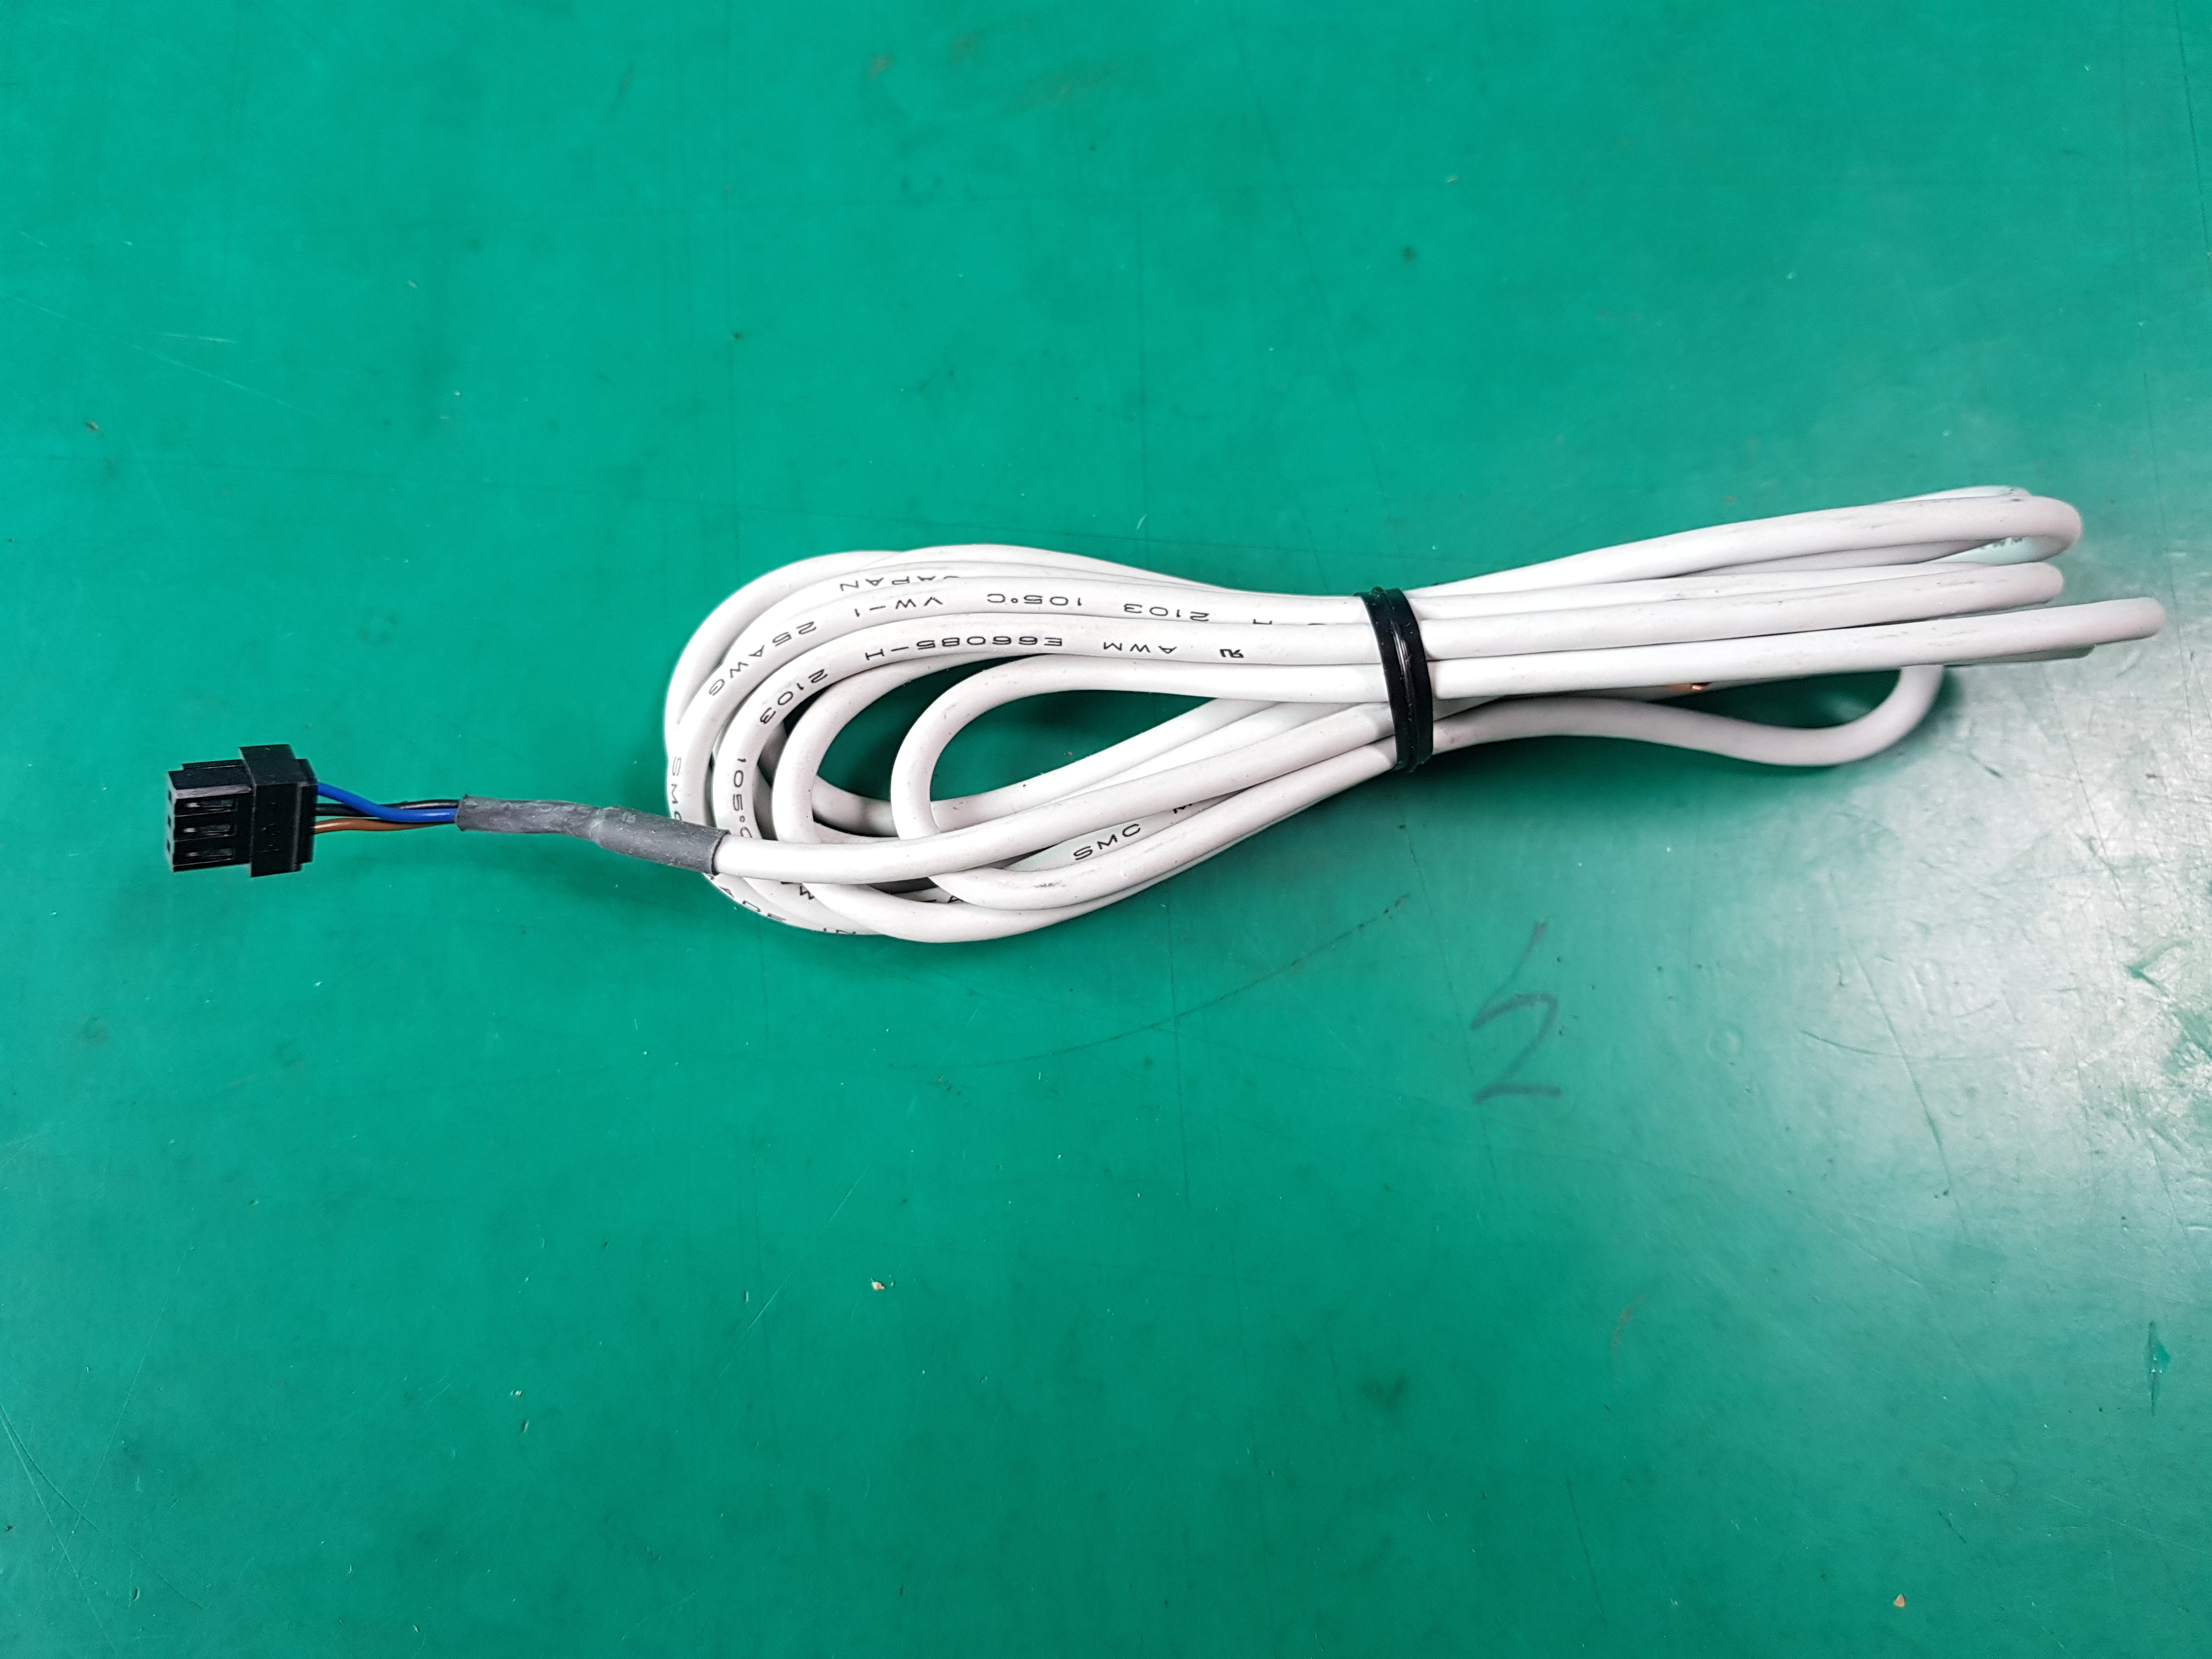 PRESSURE SWITCH CABLE ZS-28-CA-4(미사용품)